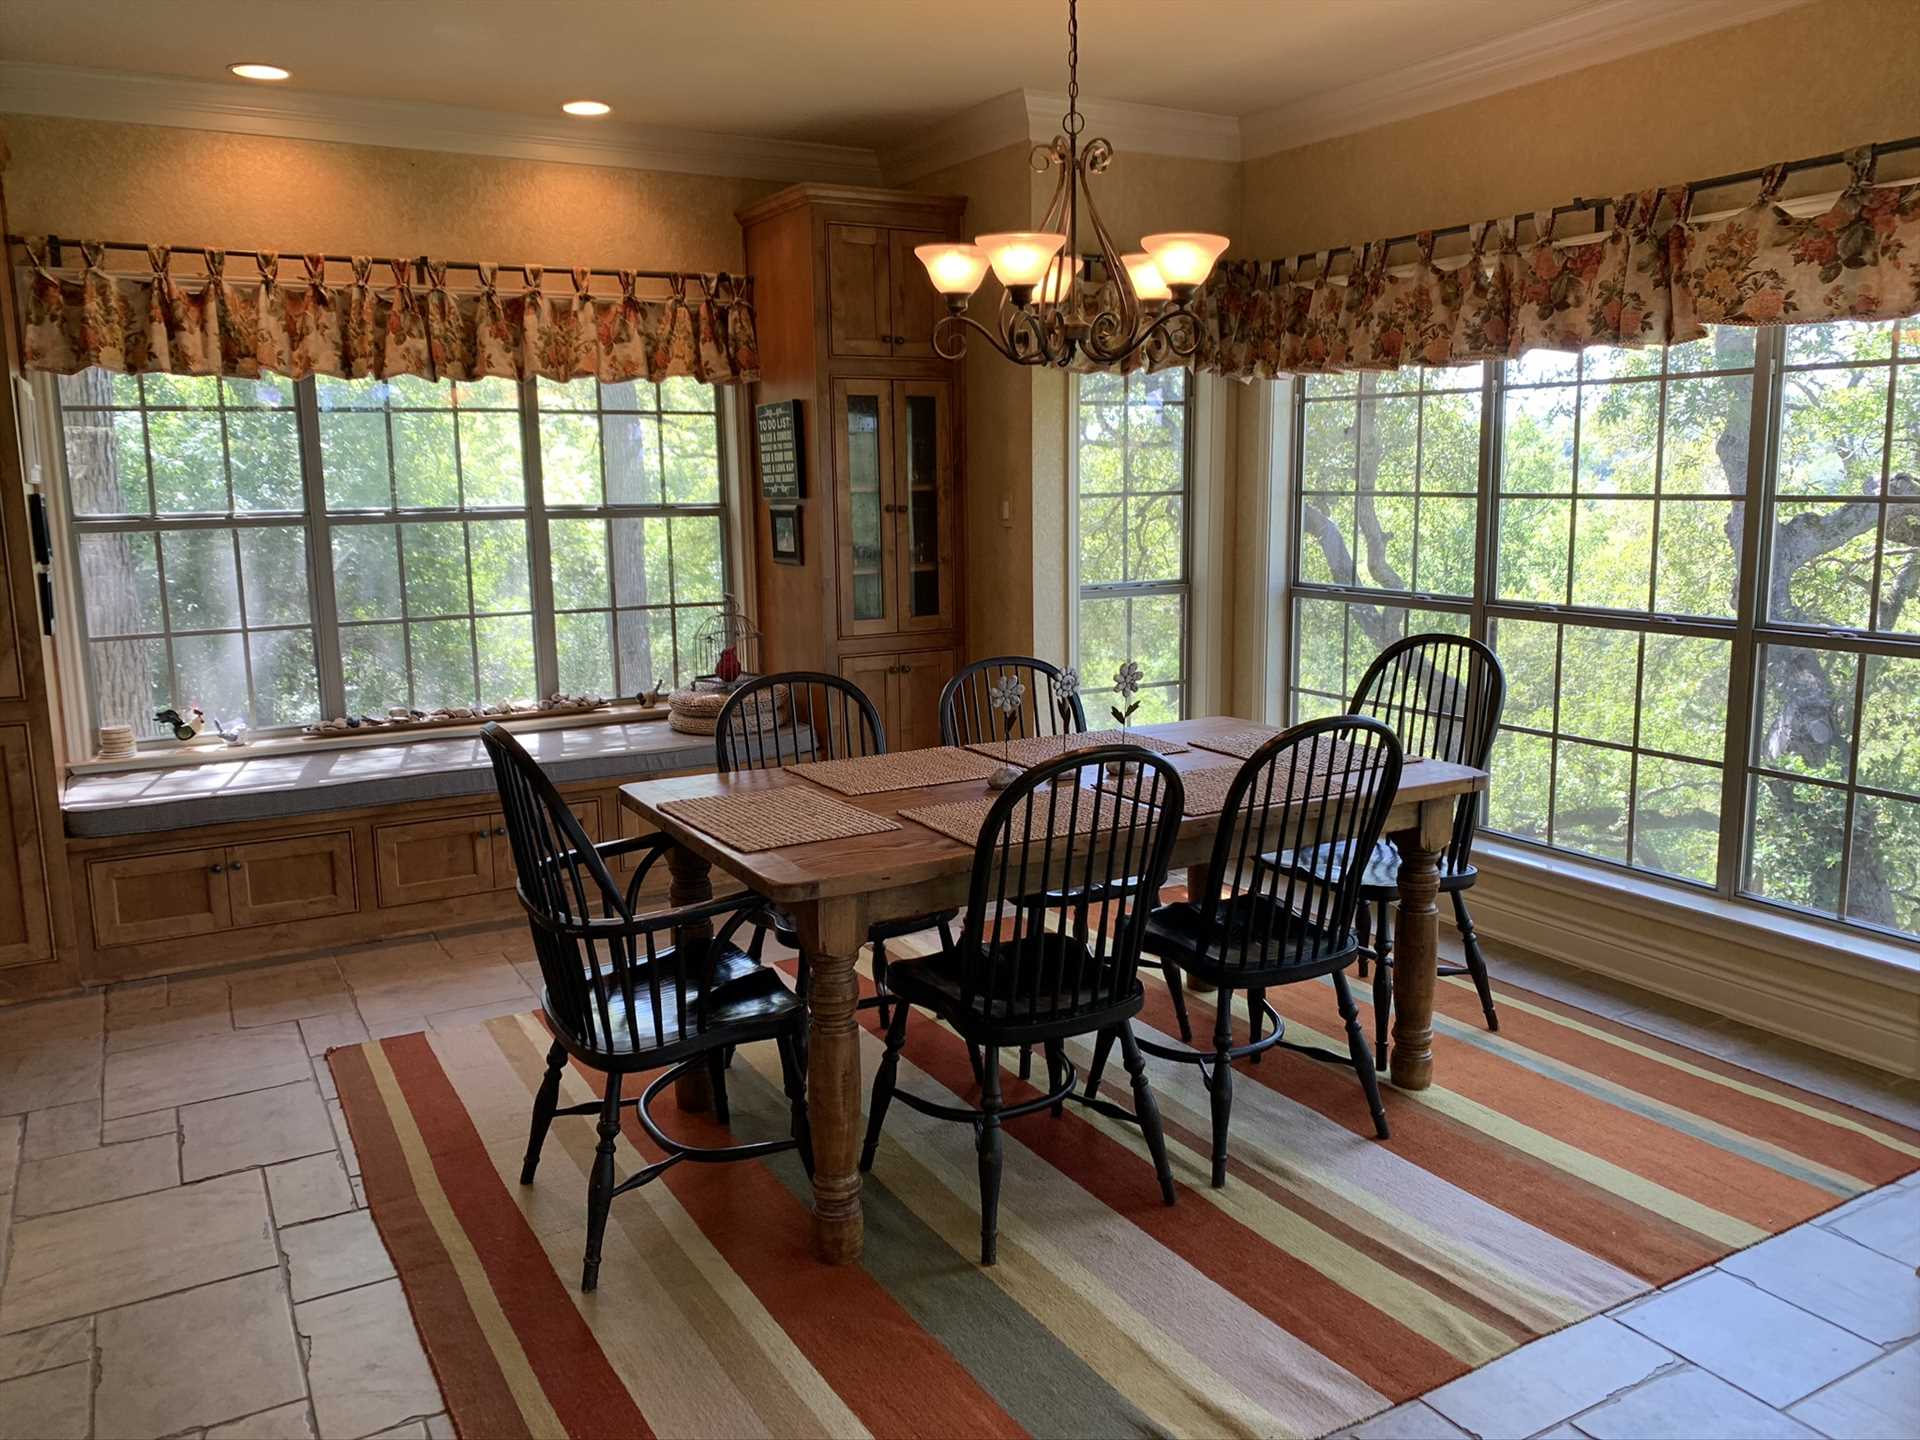                                                 Those pretty views surround you and your family and friends in the dining room and adjacent breakfast nook.